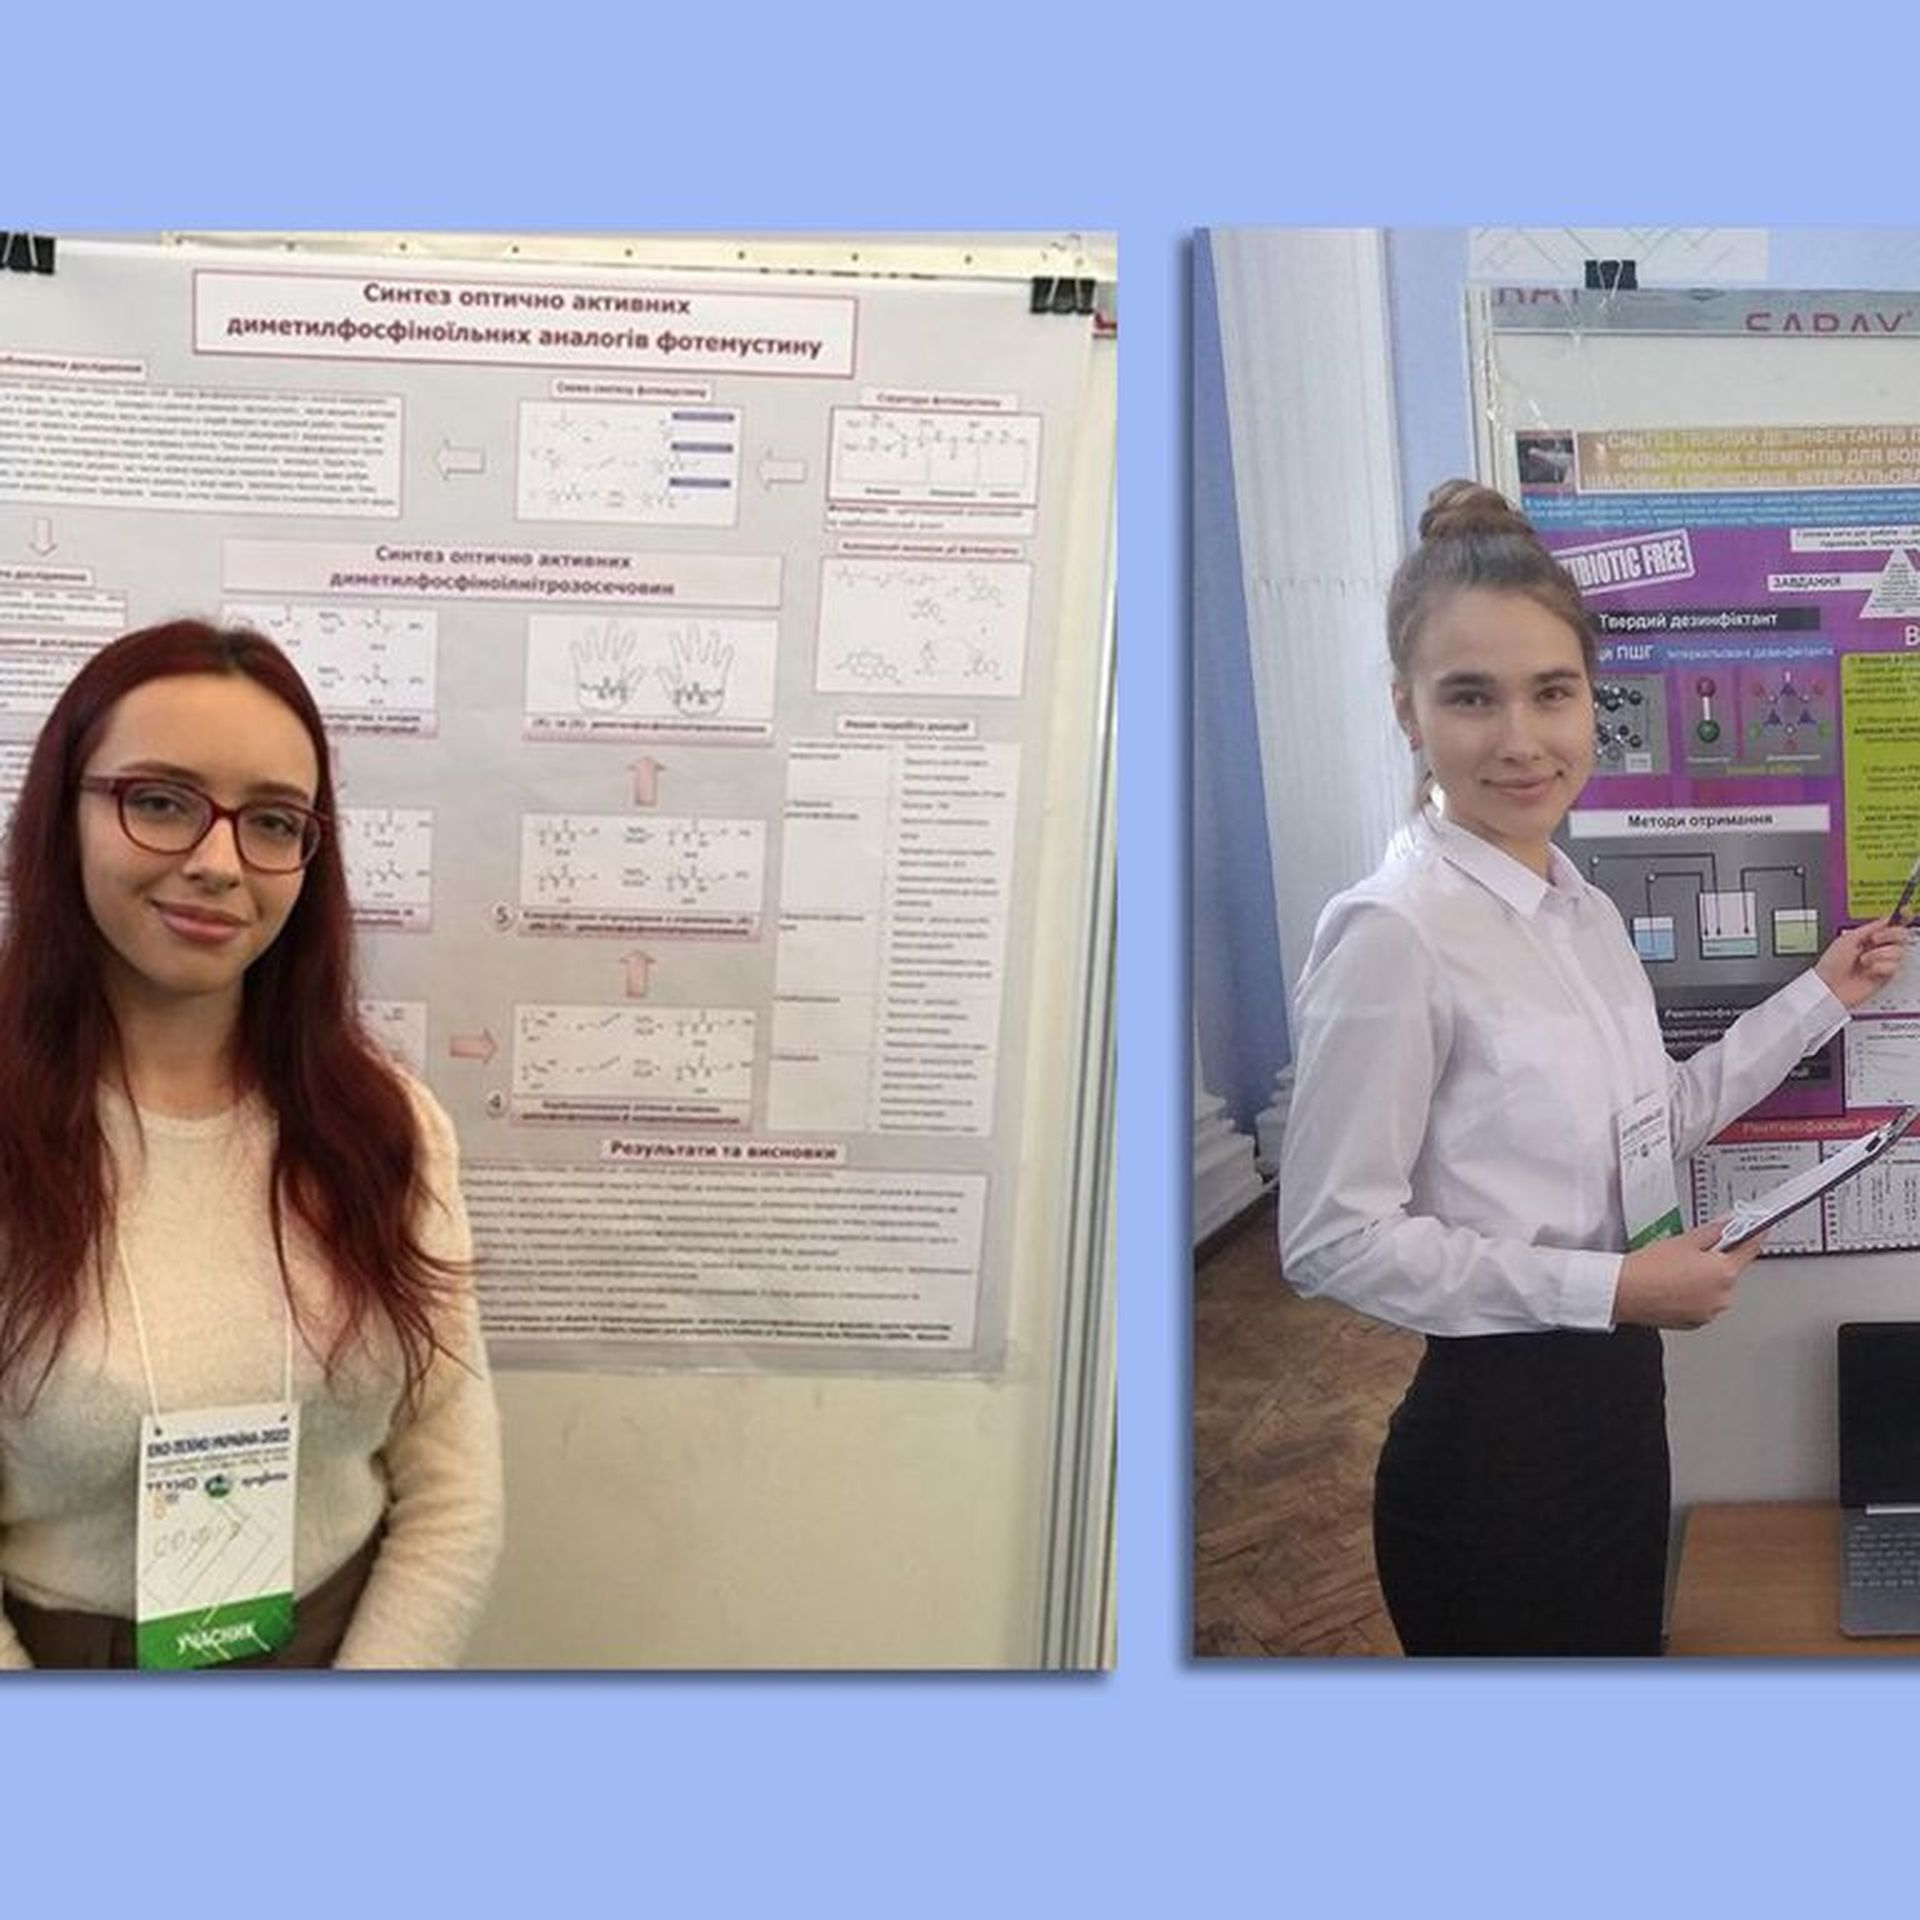 Sofiia Smovzh with her research poster at ISEF in Kiev in February 2022 (on left); Sofiia Timofieieva at Eco-Techno Ukraine fair. Photos courtesy of Sofiia Smovzh and Sofiia Timofieieva